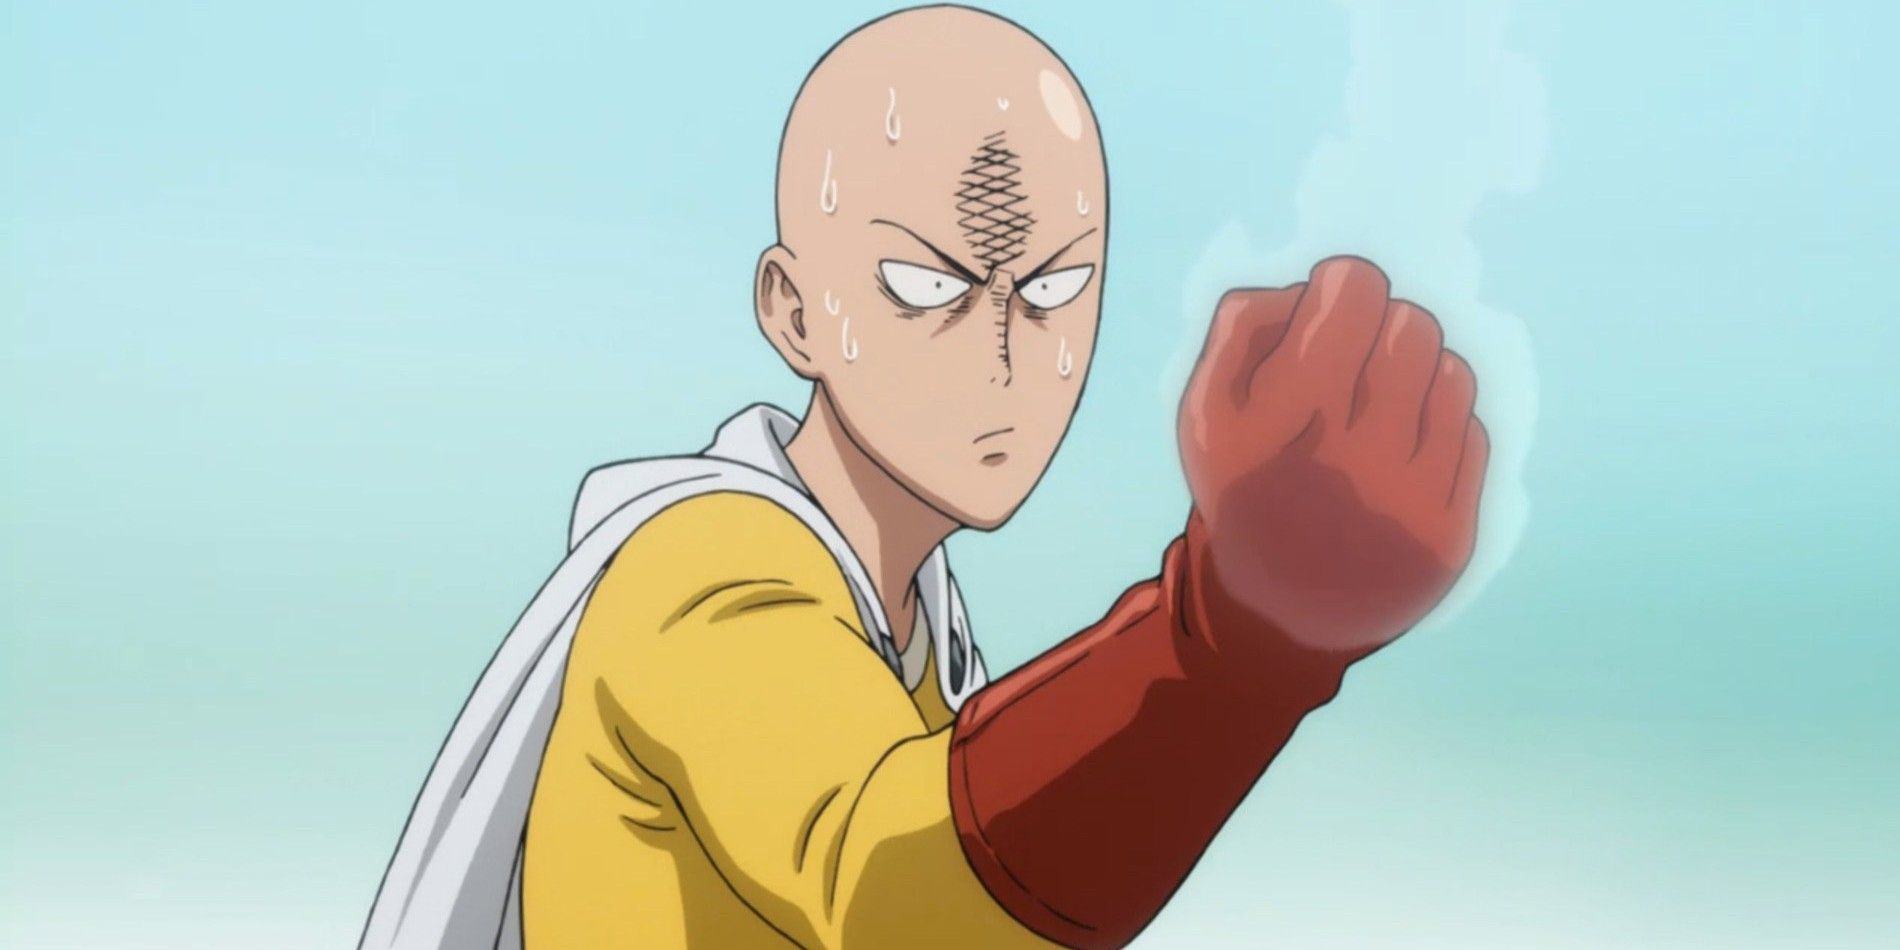 Saitama throws a punch in One Punch Man